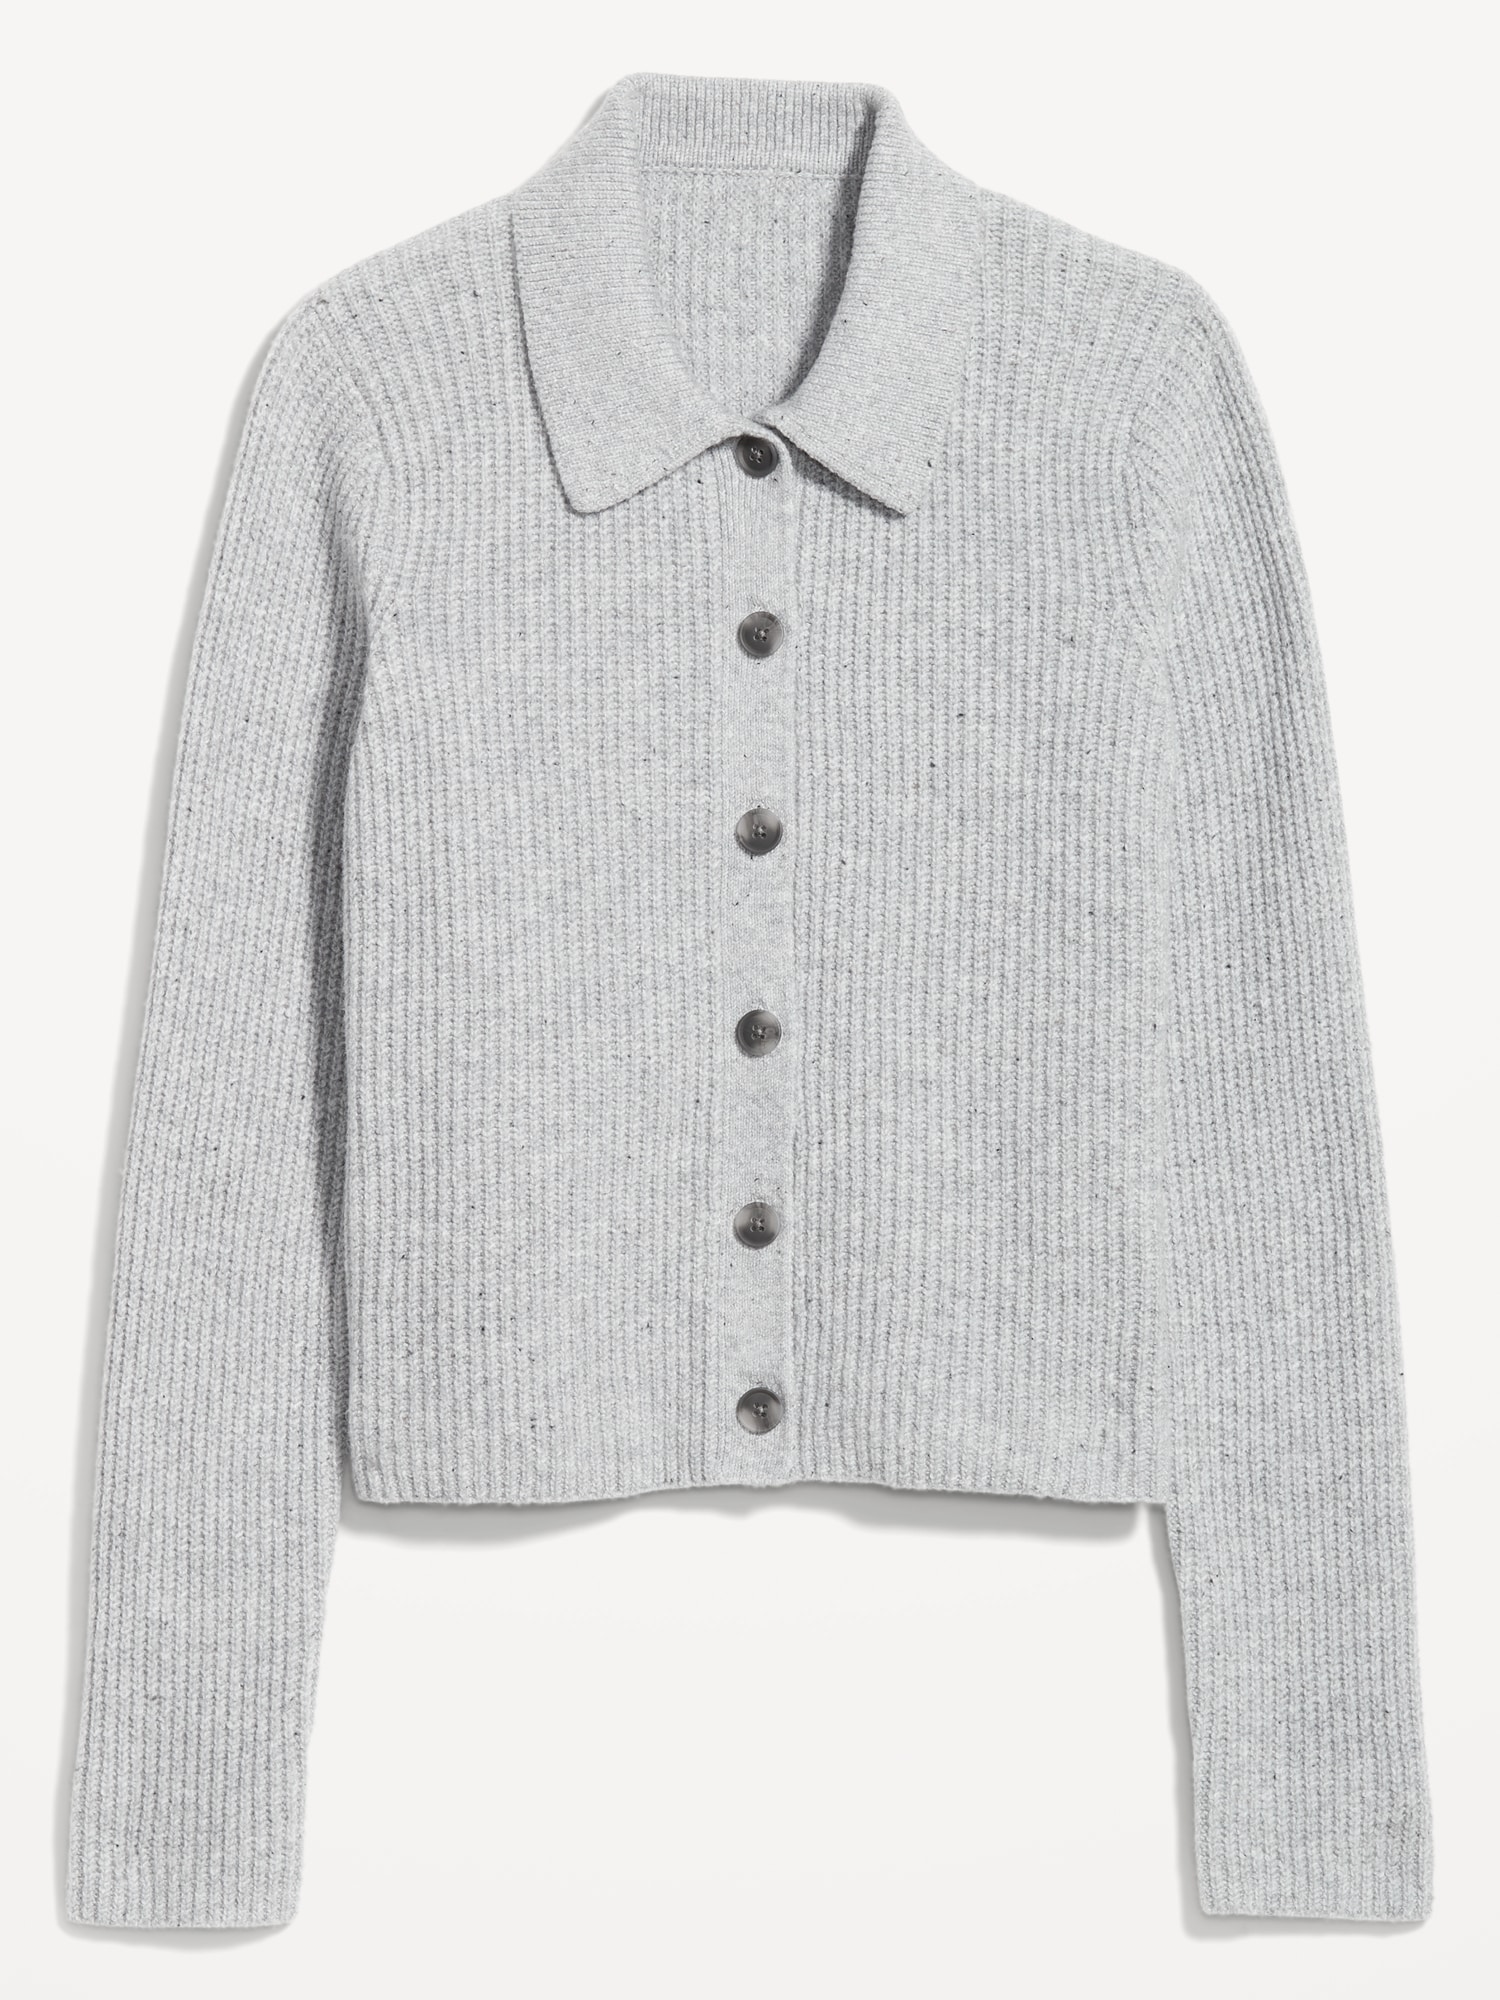 SoSoft Collared Cardigan Sweater for Women | Old Navy